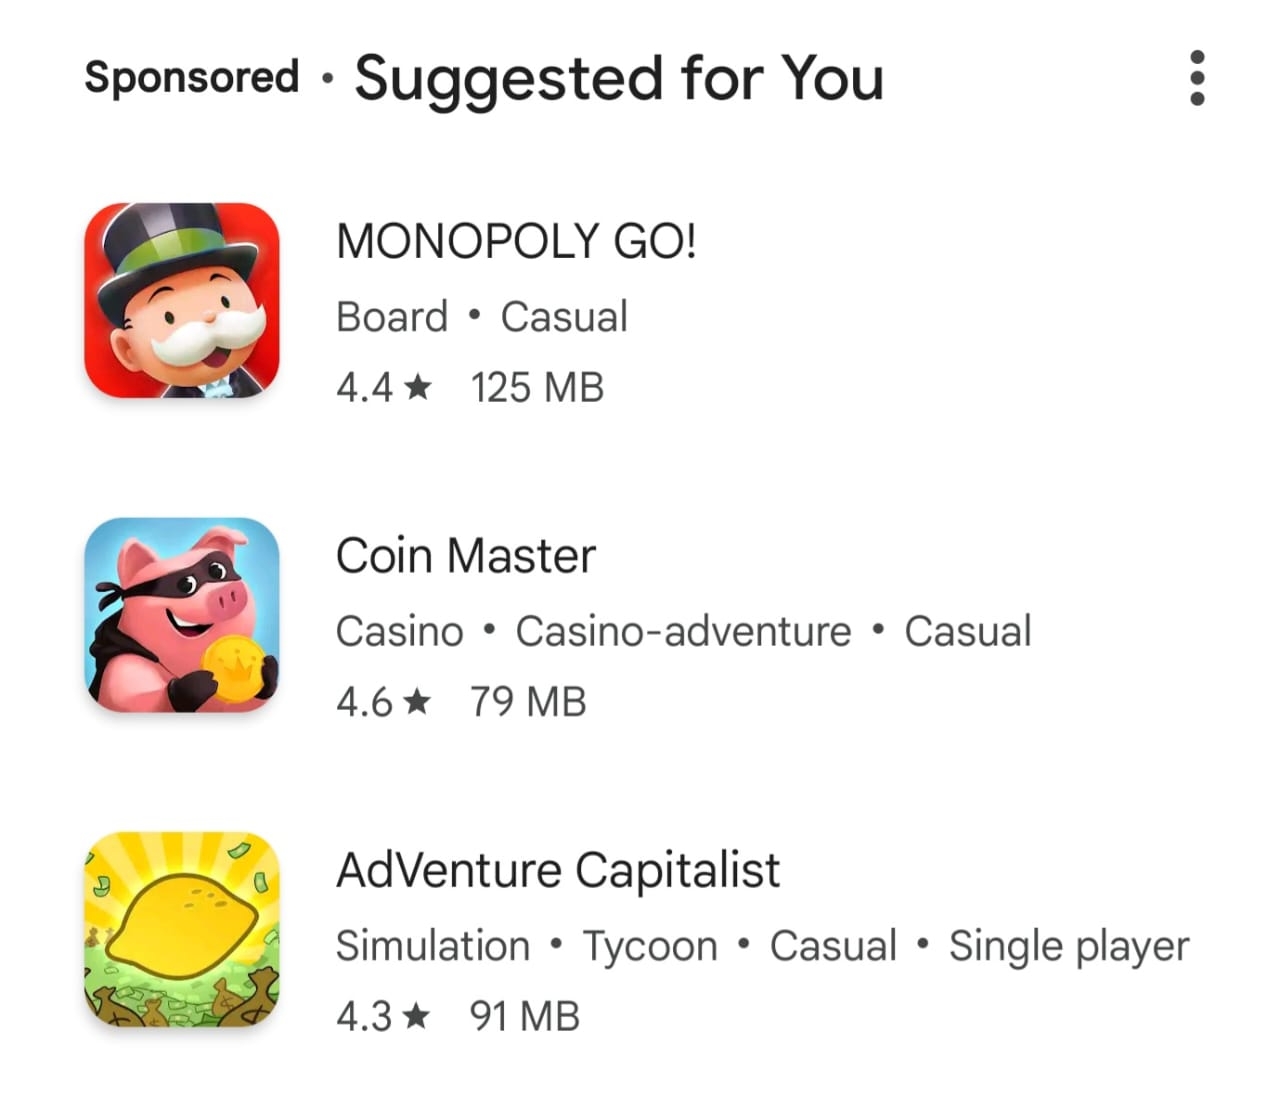 sponsored app section shows three phone games suggested for you